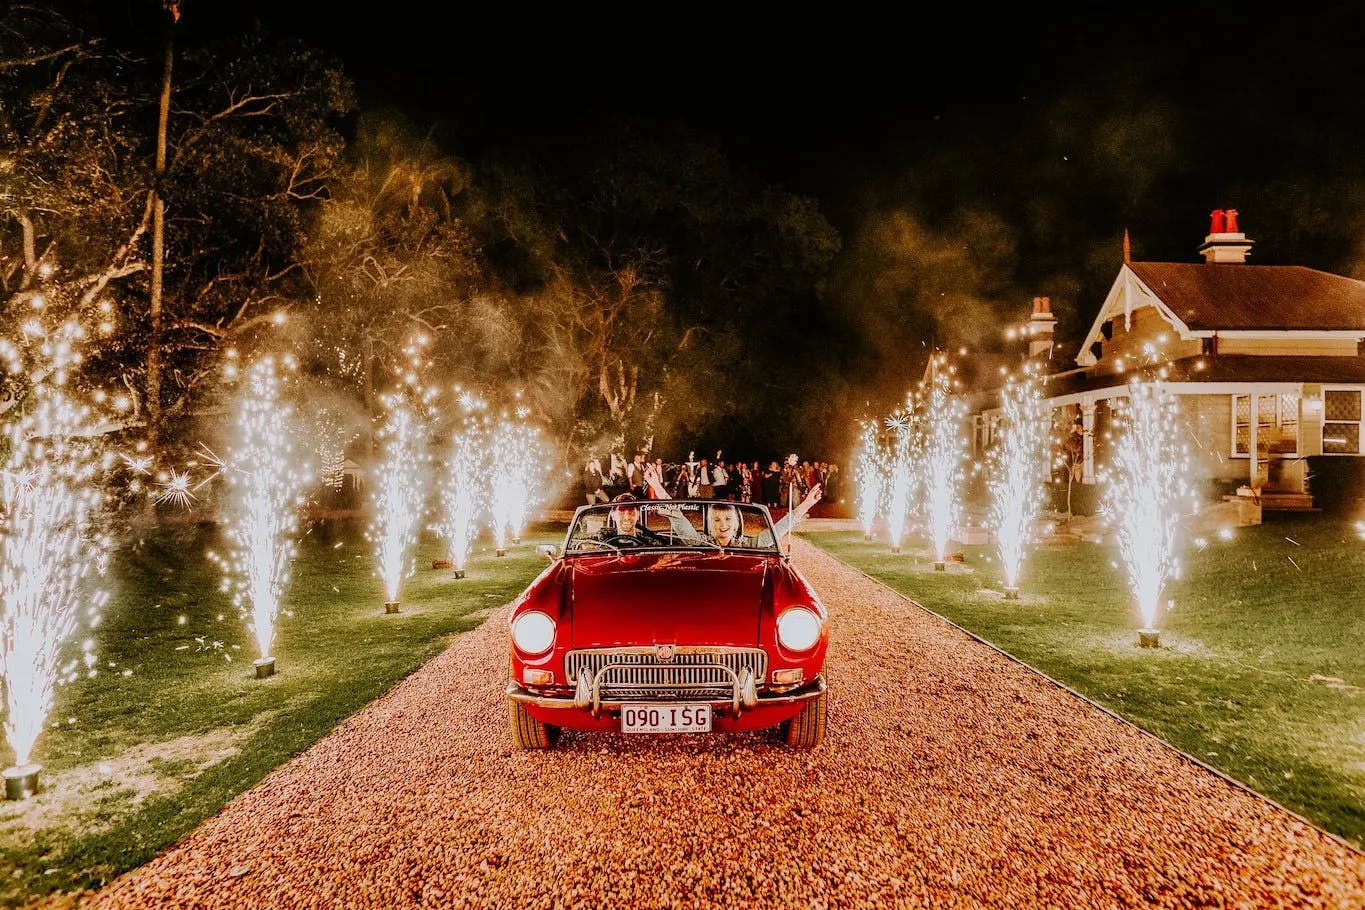 A red convertible car drives down a gravel path lined with sparklers on both sides, creating a festive atmosphere. The path leads to a house in the background, with people visible near the entrance. The scene is set at night, and the sparklers illuminate the surroundings.